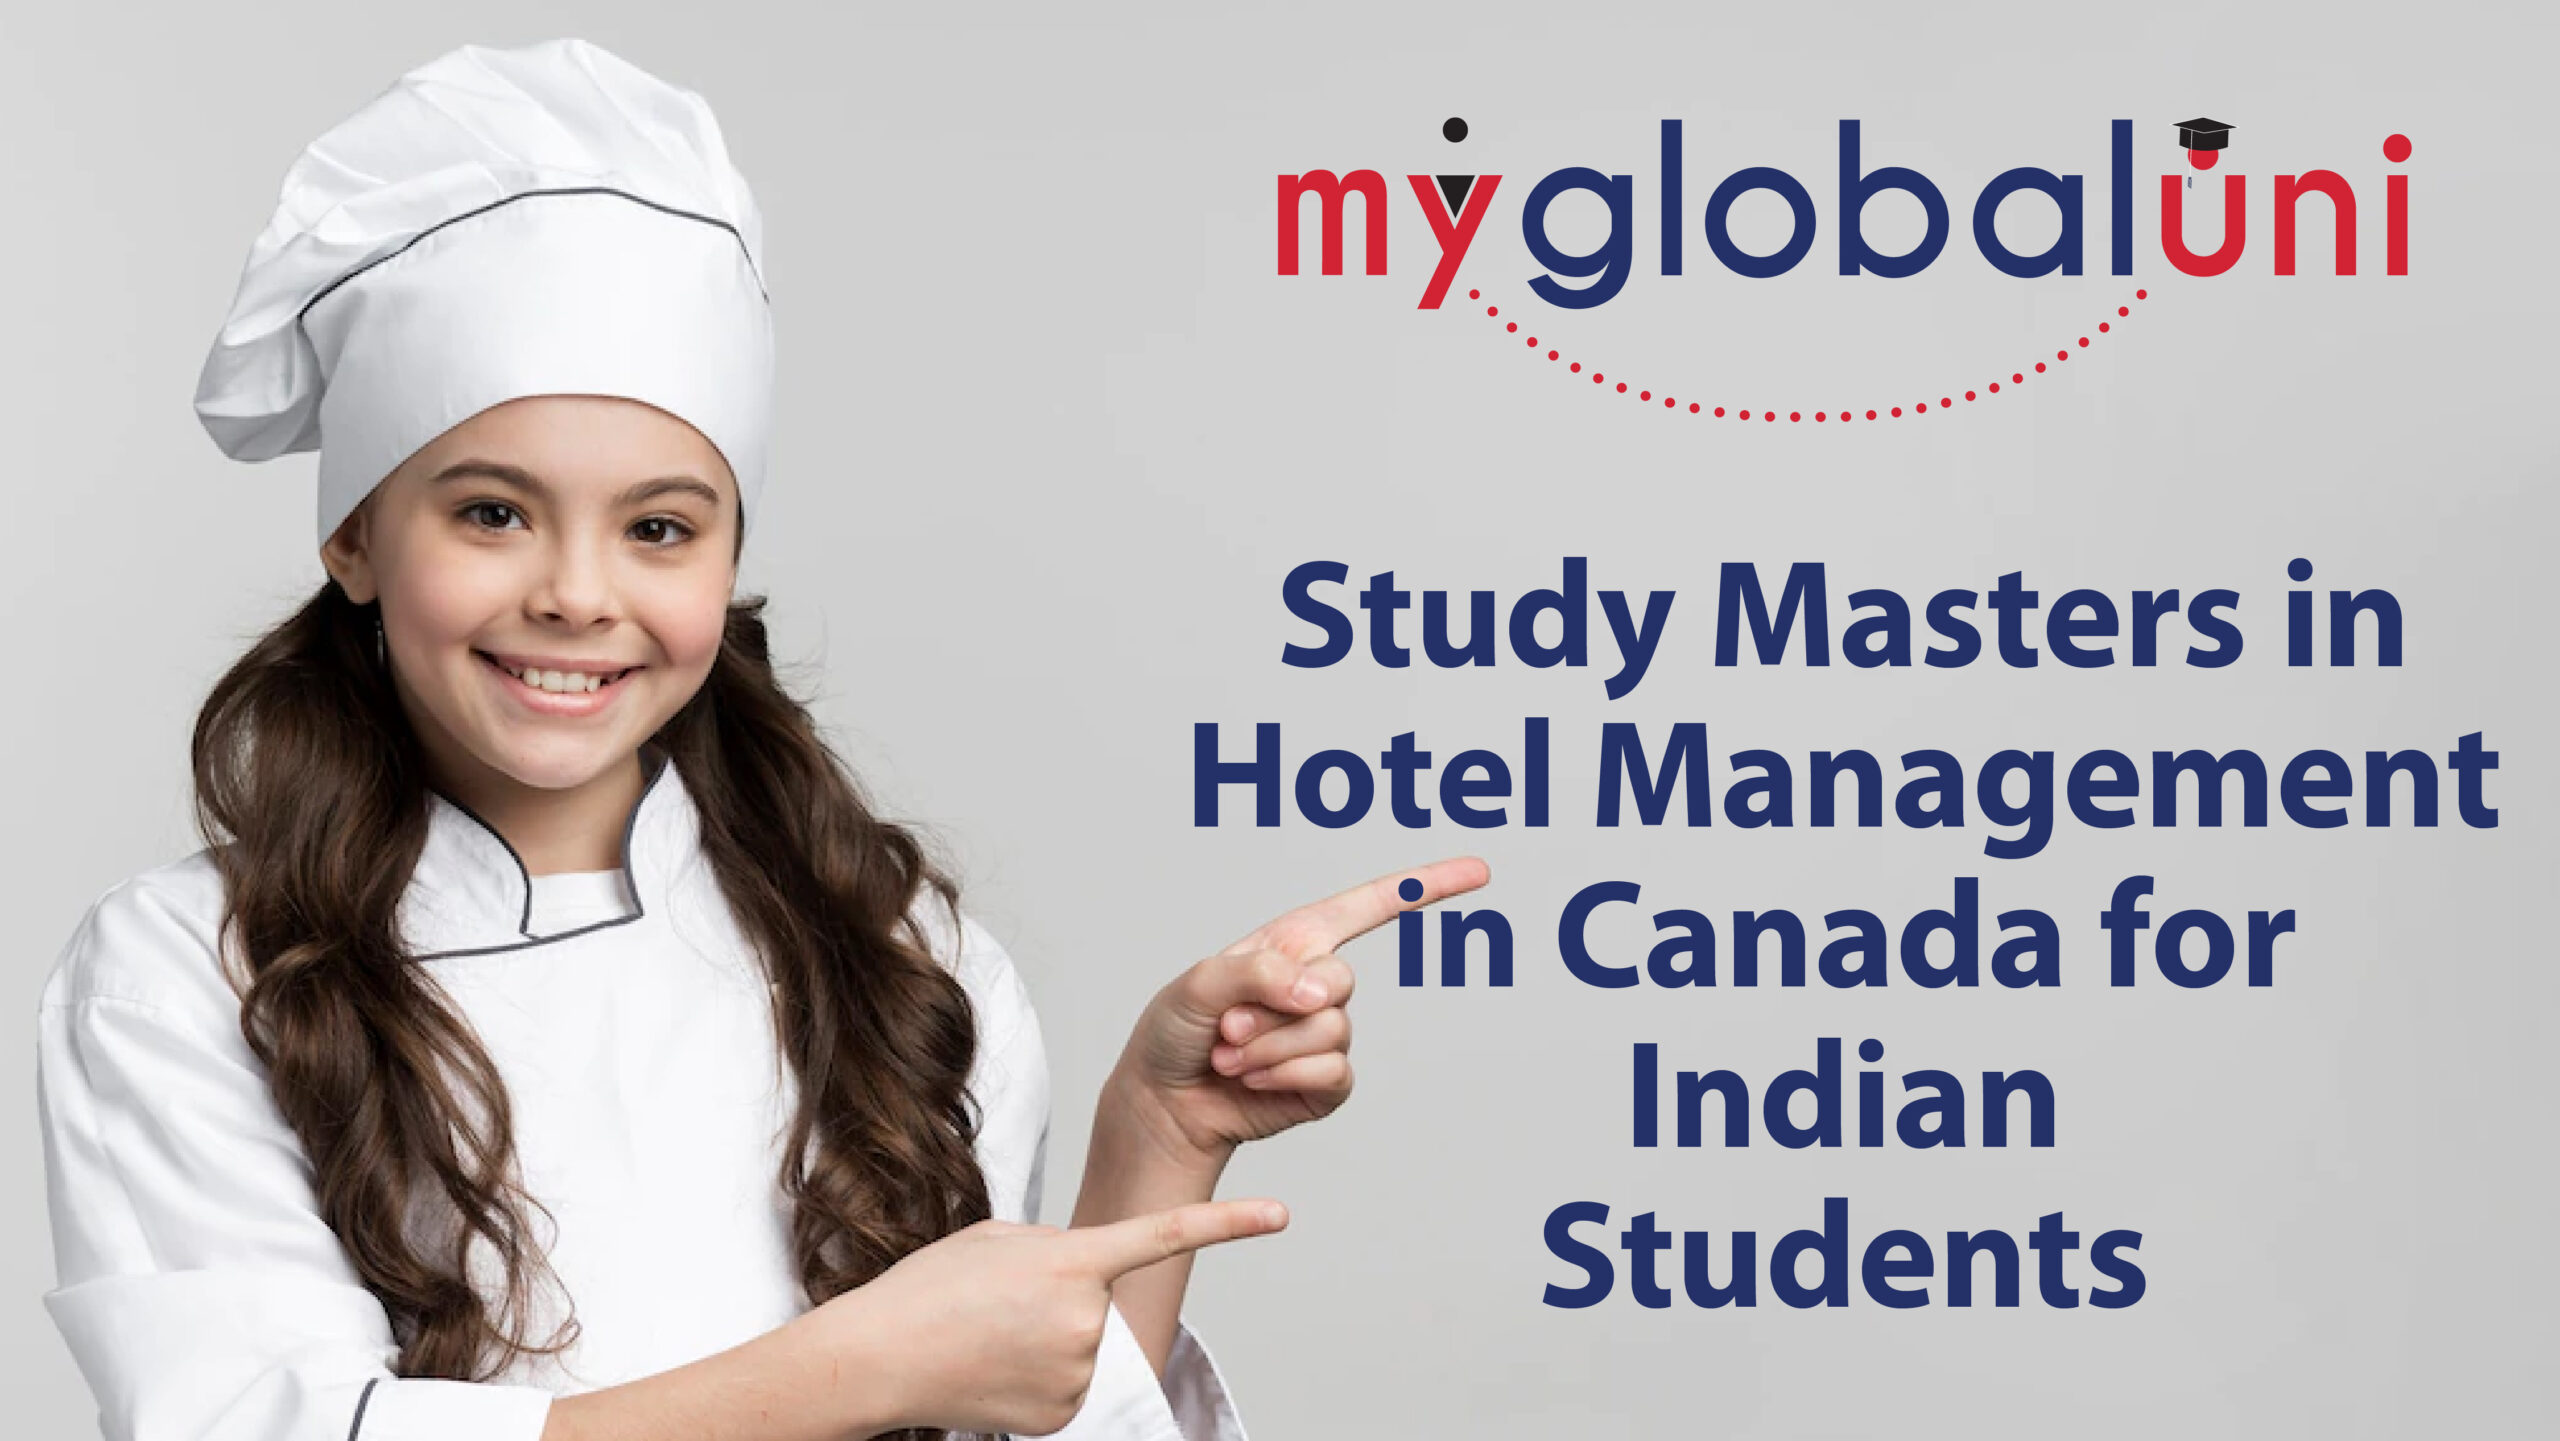 myglobaluni’s guide to Masters in Hotel Management in Canada for Indian Students